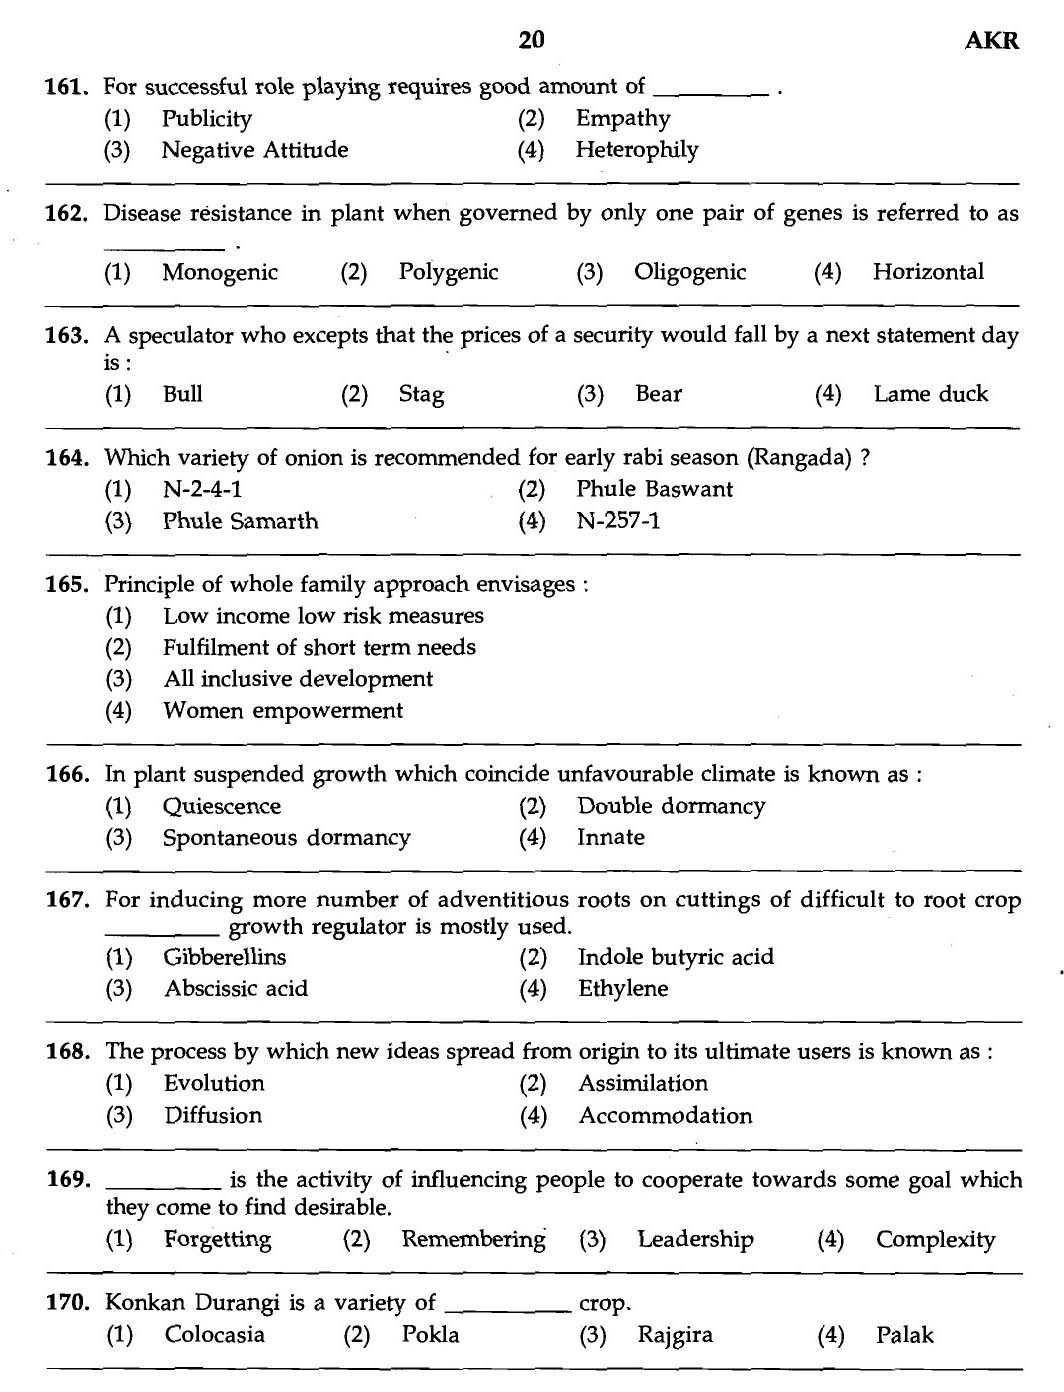 MPSC Agricultural Services Exam 2007 Question Paper Agriculture 18